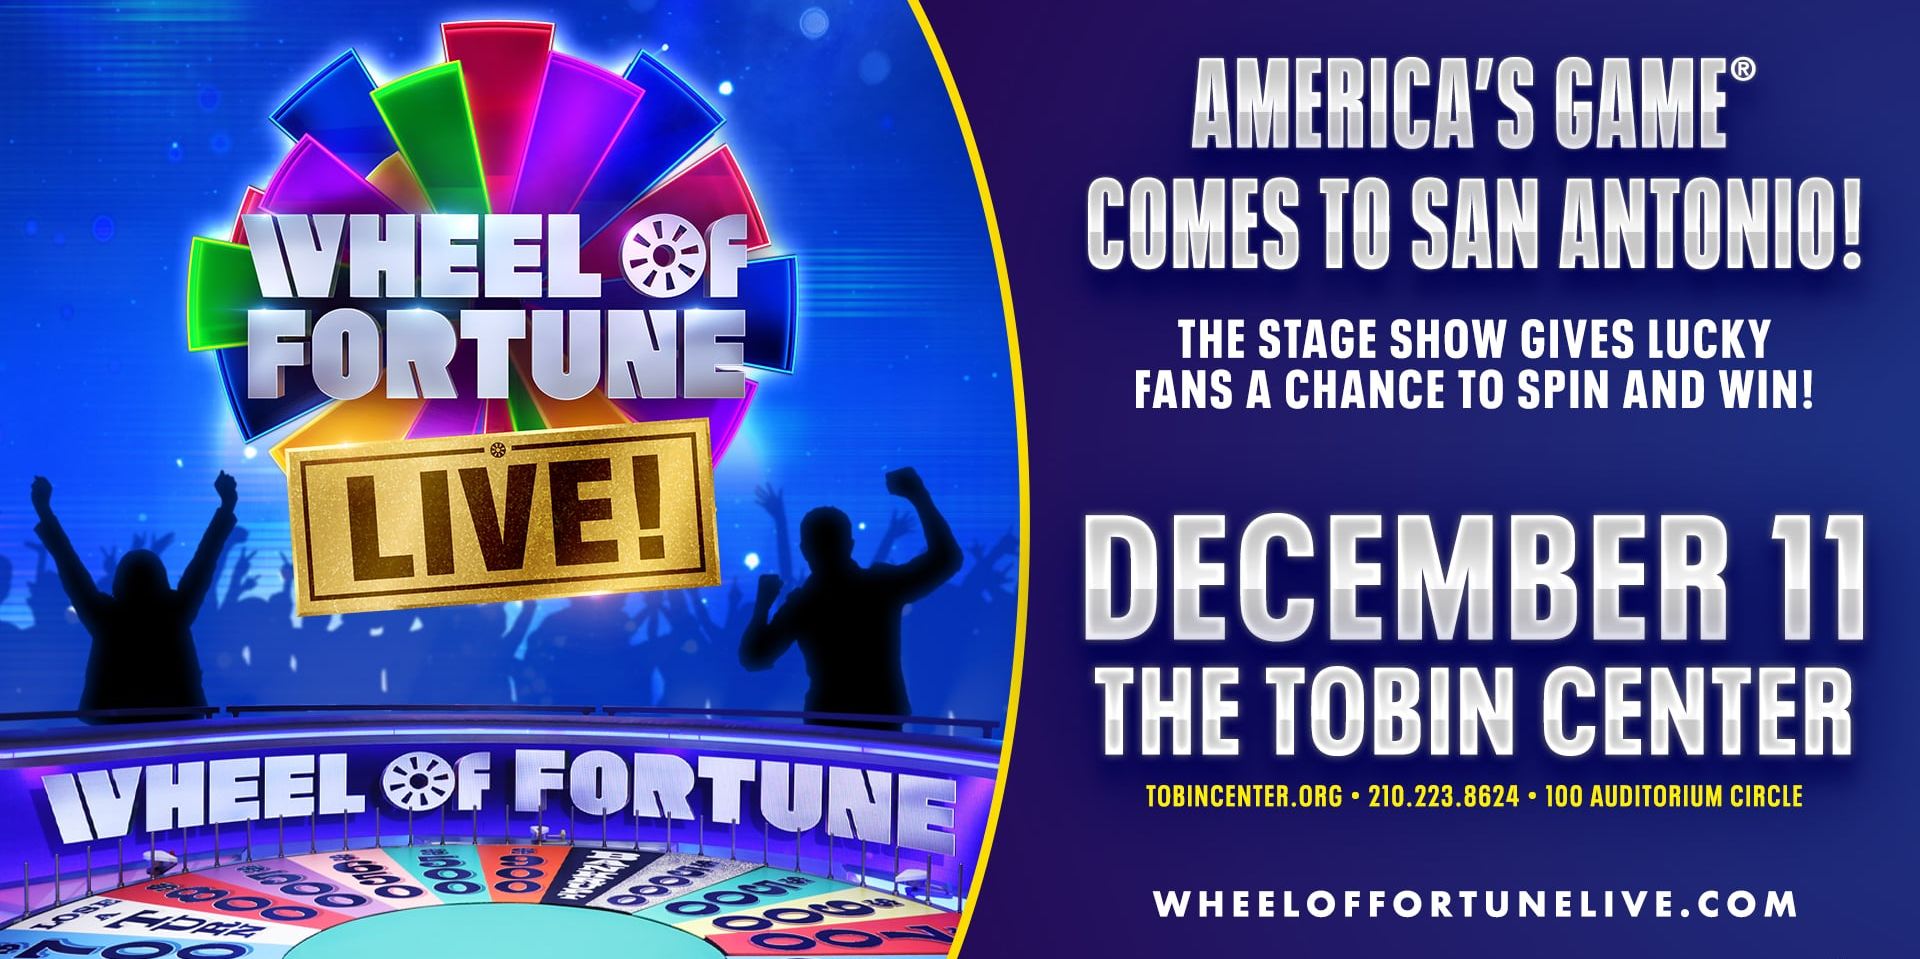 Wheel of Fortune Live! promotional image